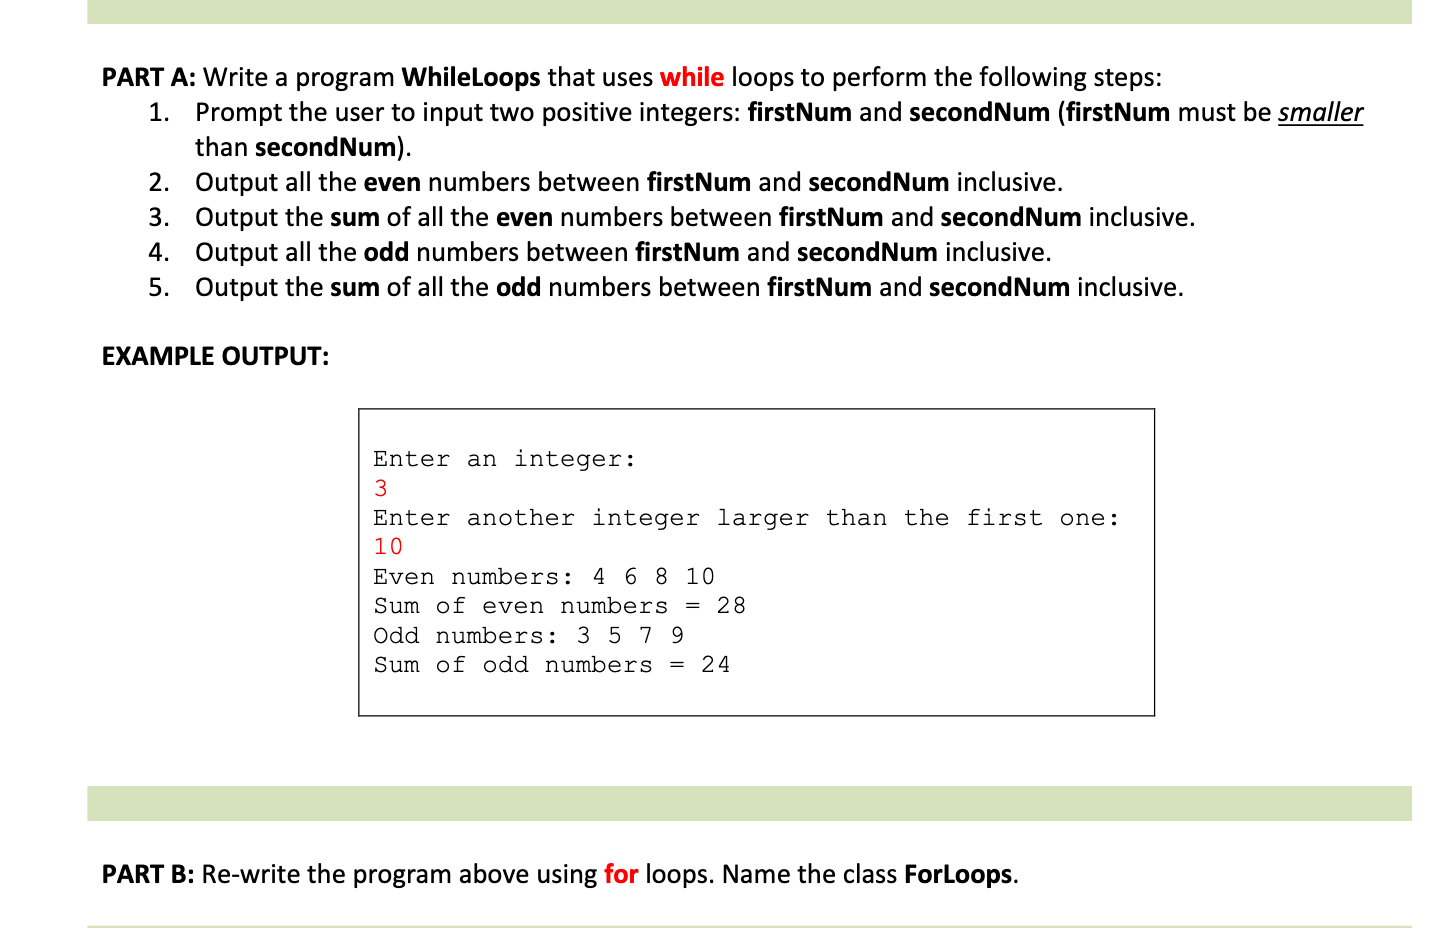 PART A: Write a program WhileLoops that uses while loops to perform the following steps:
1. Prompt the user to input two positive integers: firstNum and secondNum (firstNum must be smaller
than secondNum).
2. Output all the even numbers between firstNum and secondNum inclusive.
3. Output the sum of all the even numbers between firstNum and secondNum inclusive.
4. Output all the odd numbers between firstNum and secondNum inclusive.
5. Output the sum of all the odd numbers between firstNum and secondNum inclusive.
EXAMPLE OUTPUT:
Enter an integer:
Enter another integer larger than the first one:
10
Even numbers: 4 6 8 10
Sum of even numbers =
28
Odd numbers: 3 5 7 9
Sum of odd numbers = 24
PART B: Re-write the program above using for loops. Name the class ForLoops.
